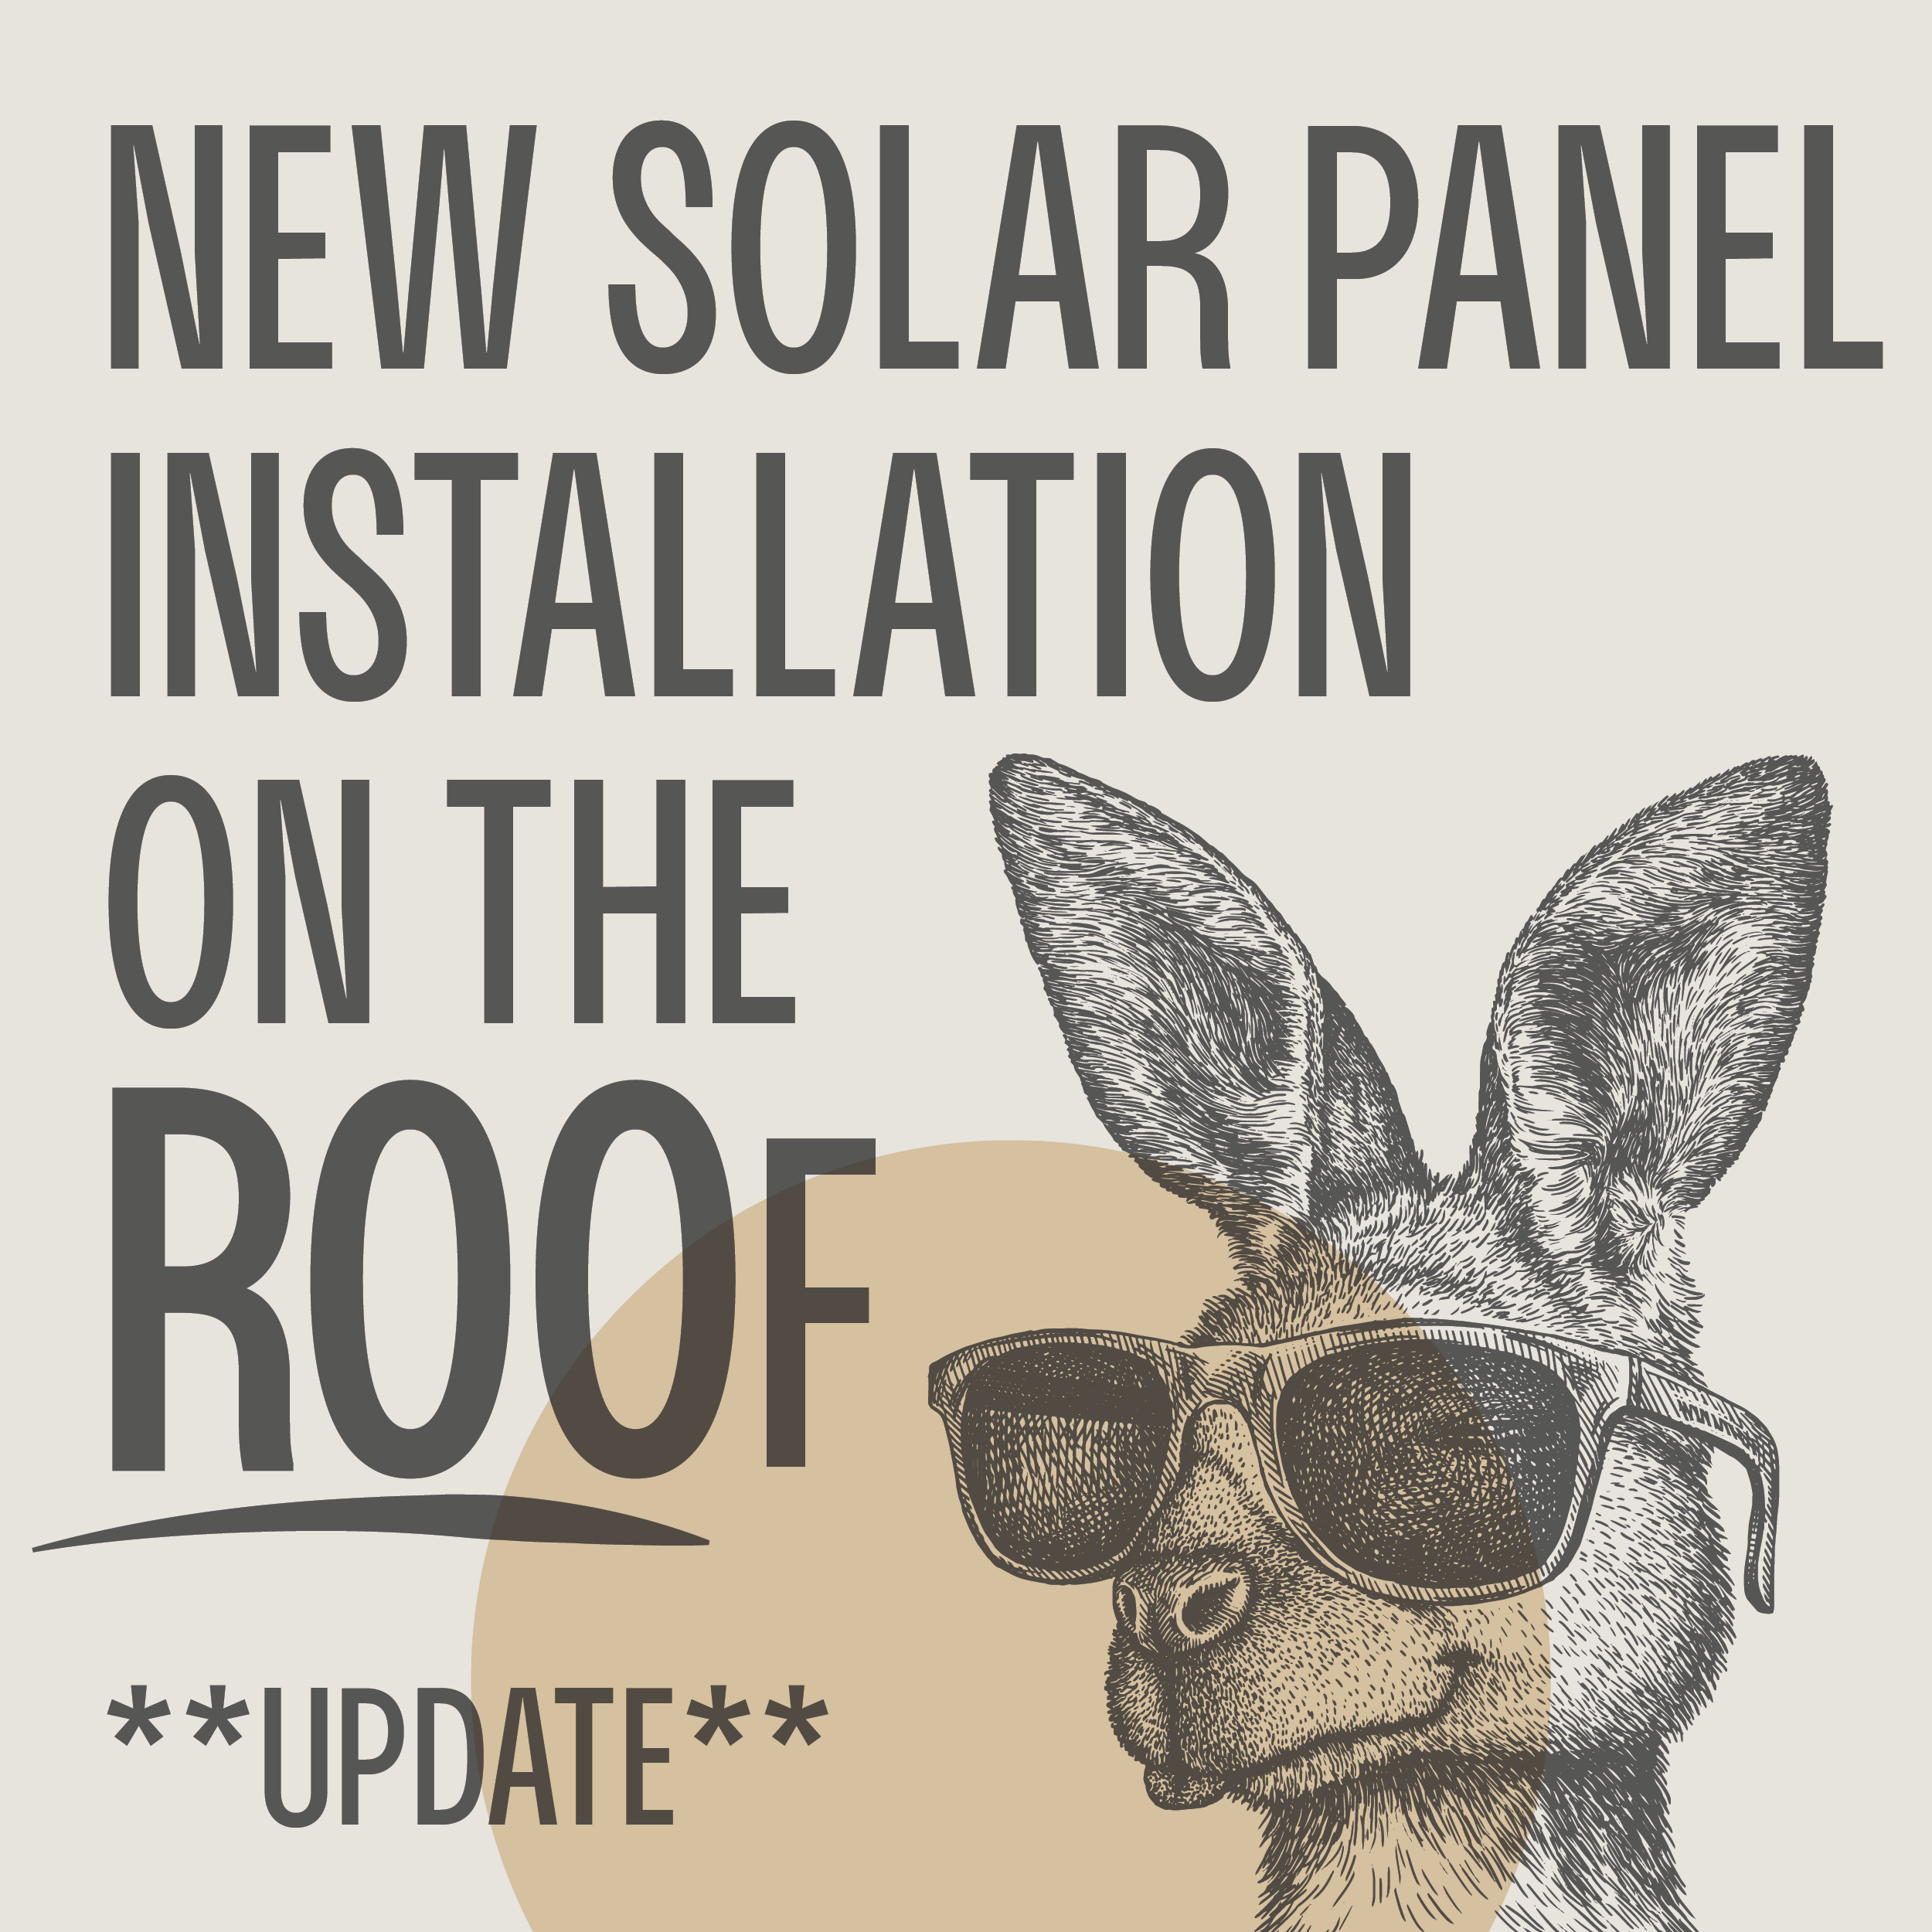 NEW SOLAR PANEL INSTALLATION ON THE ROOF **UPDATE**